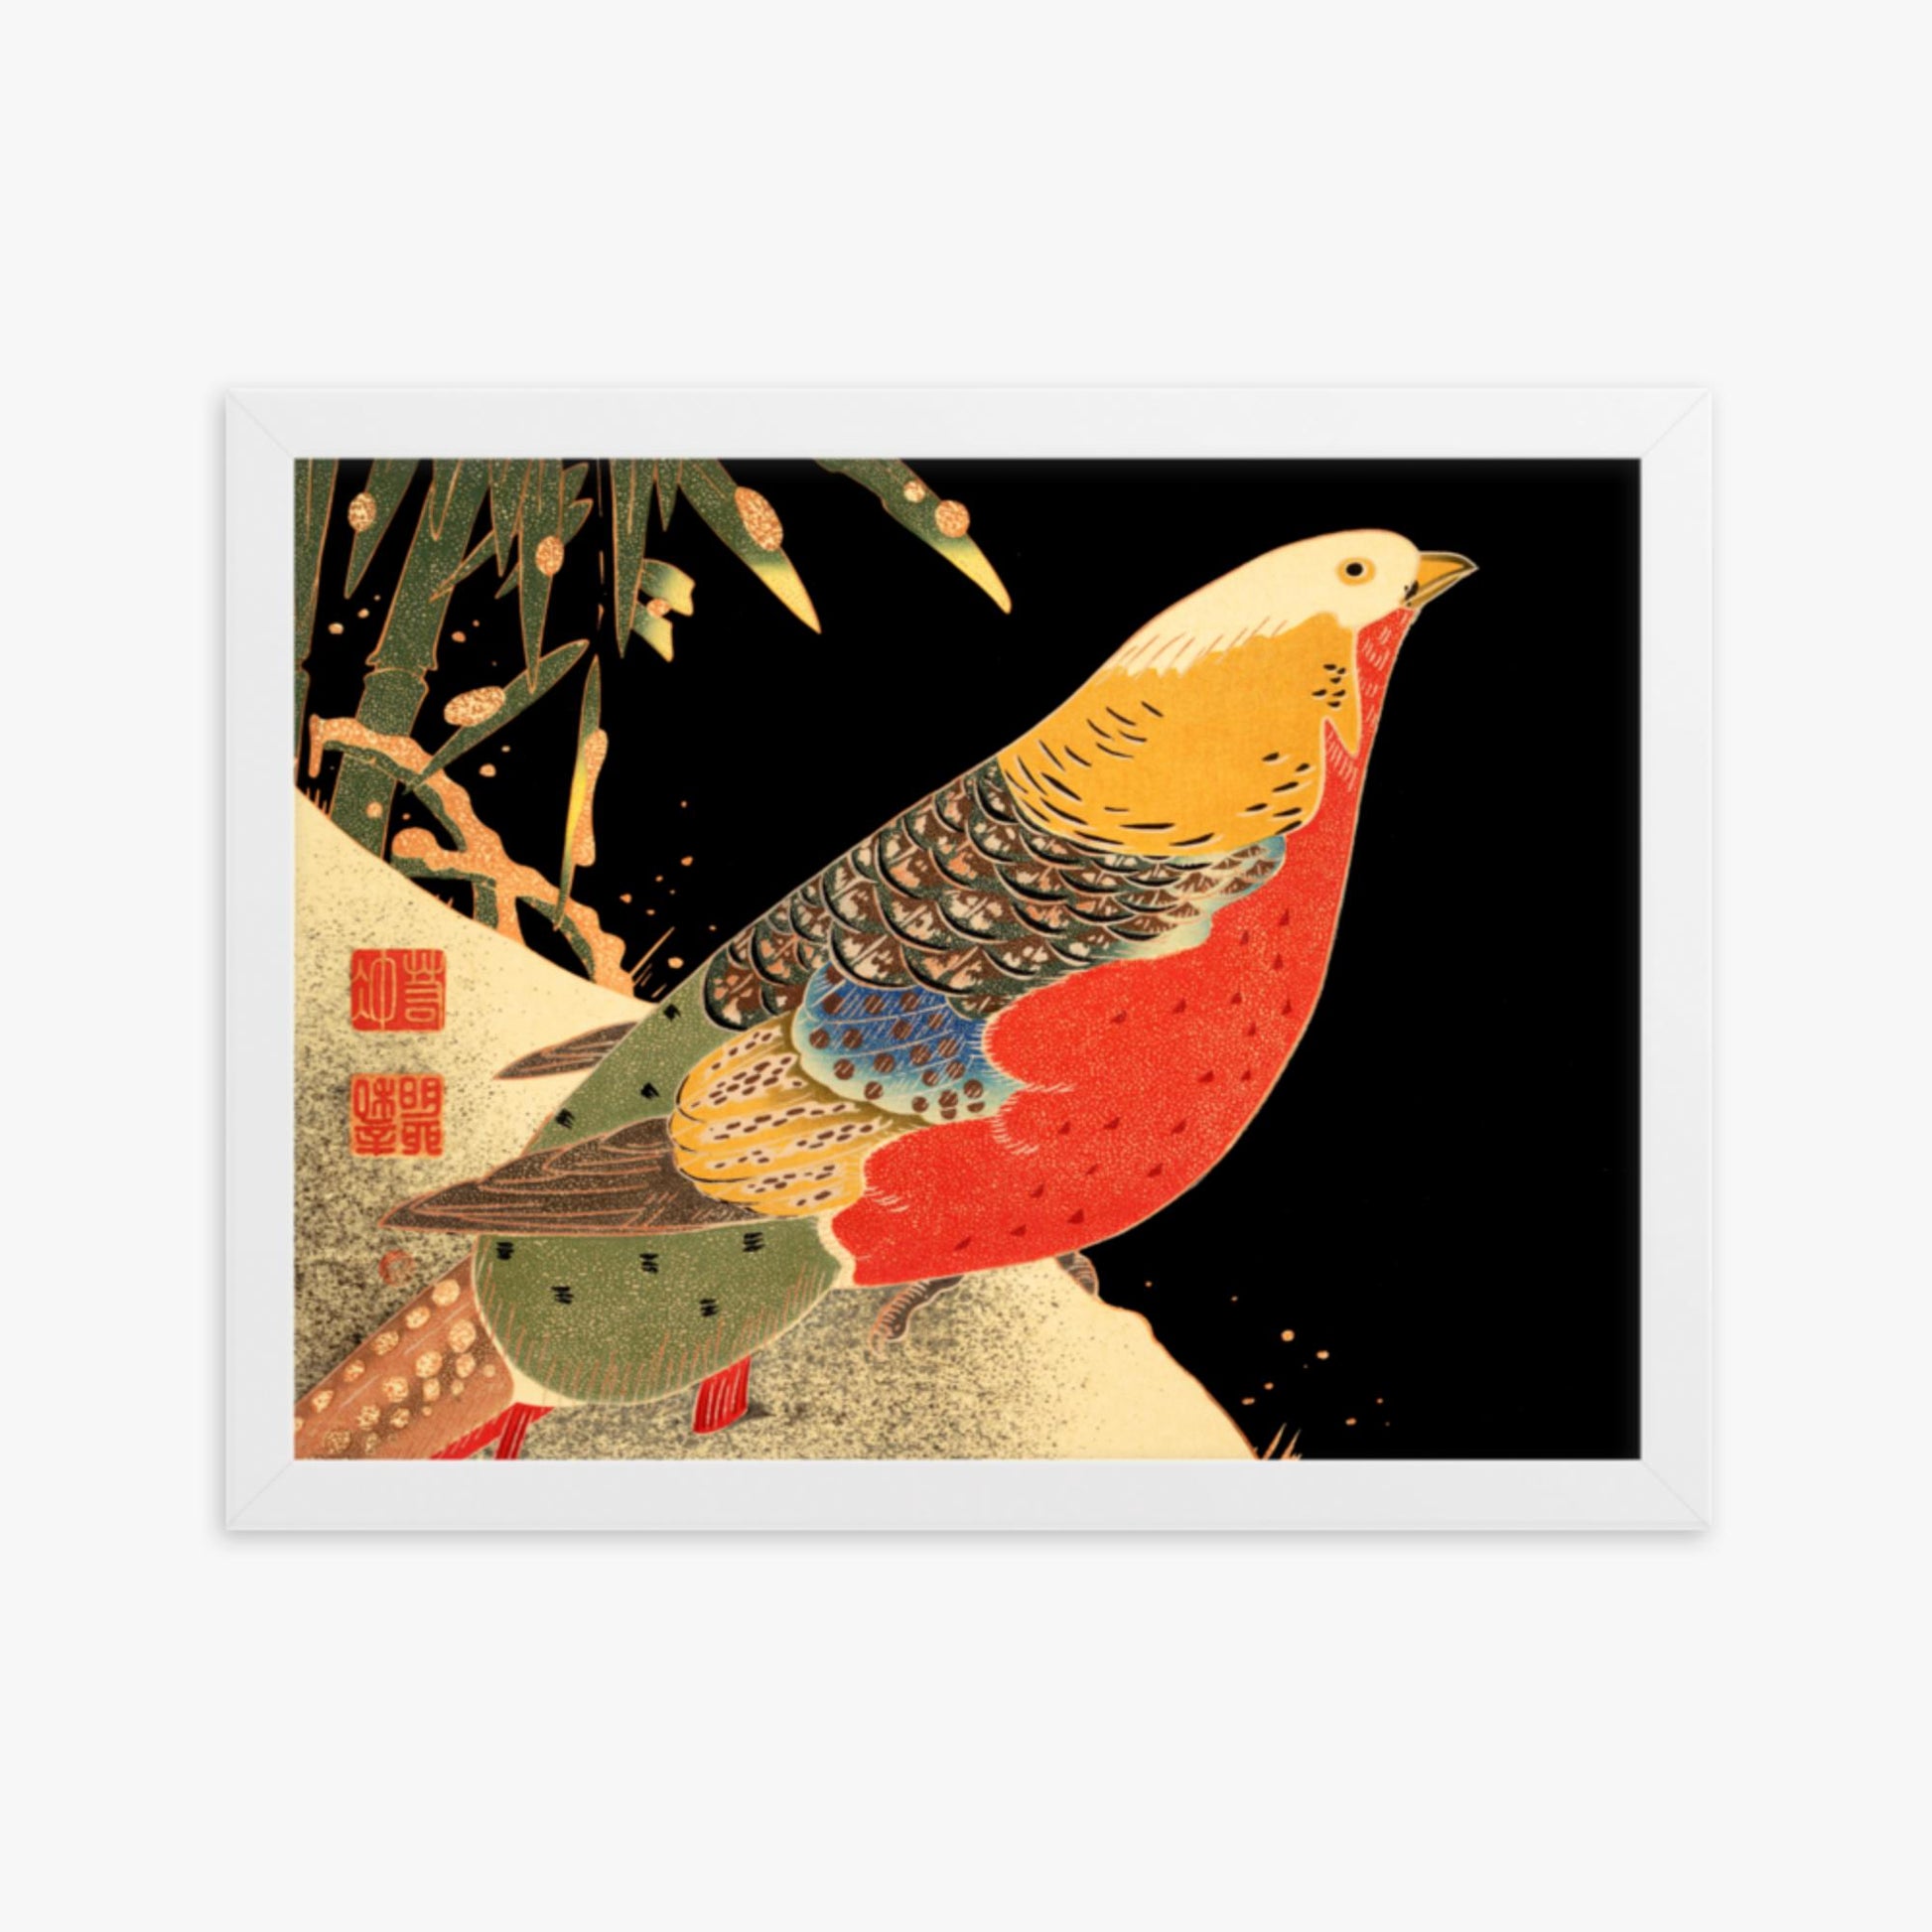 Ito Jakuchu - Golden Pheasant in the Snow 30x40 cm Poster With White Frame